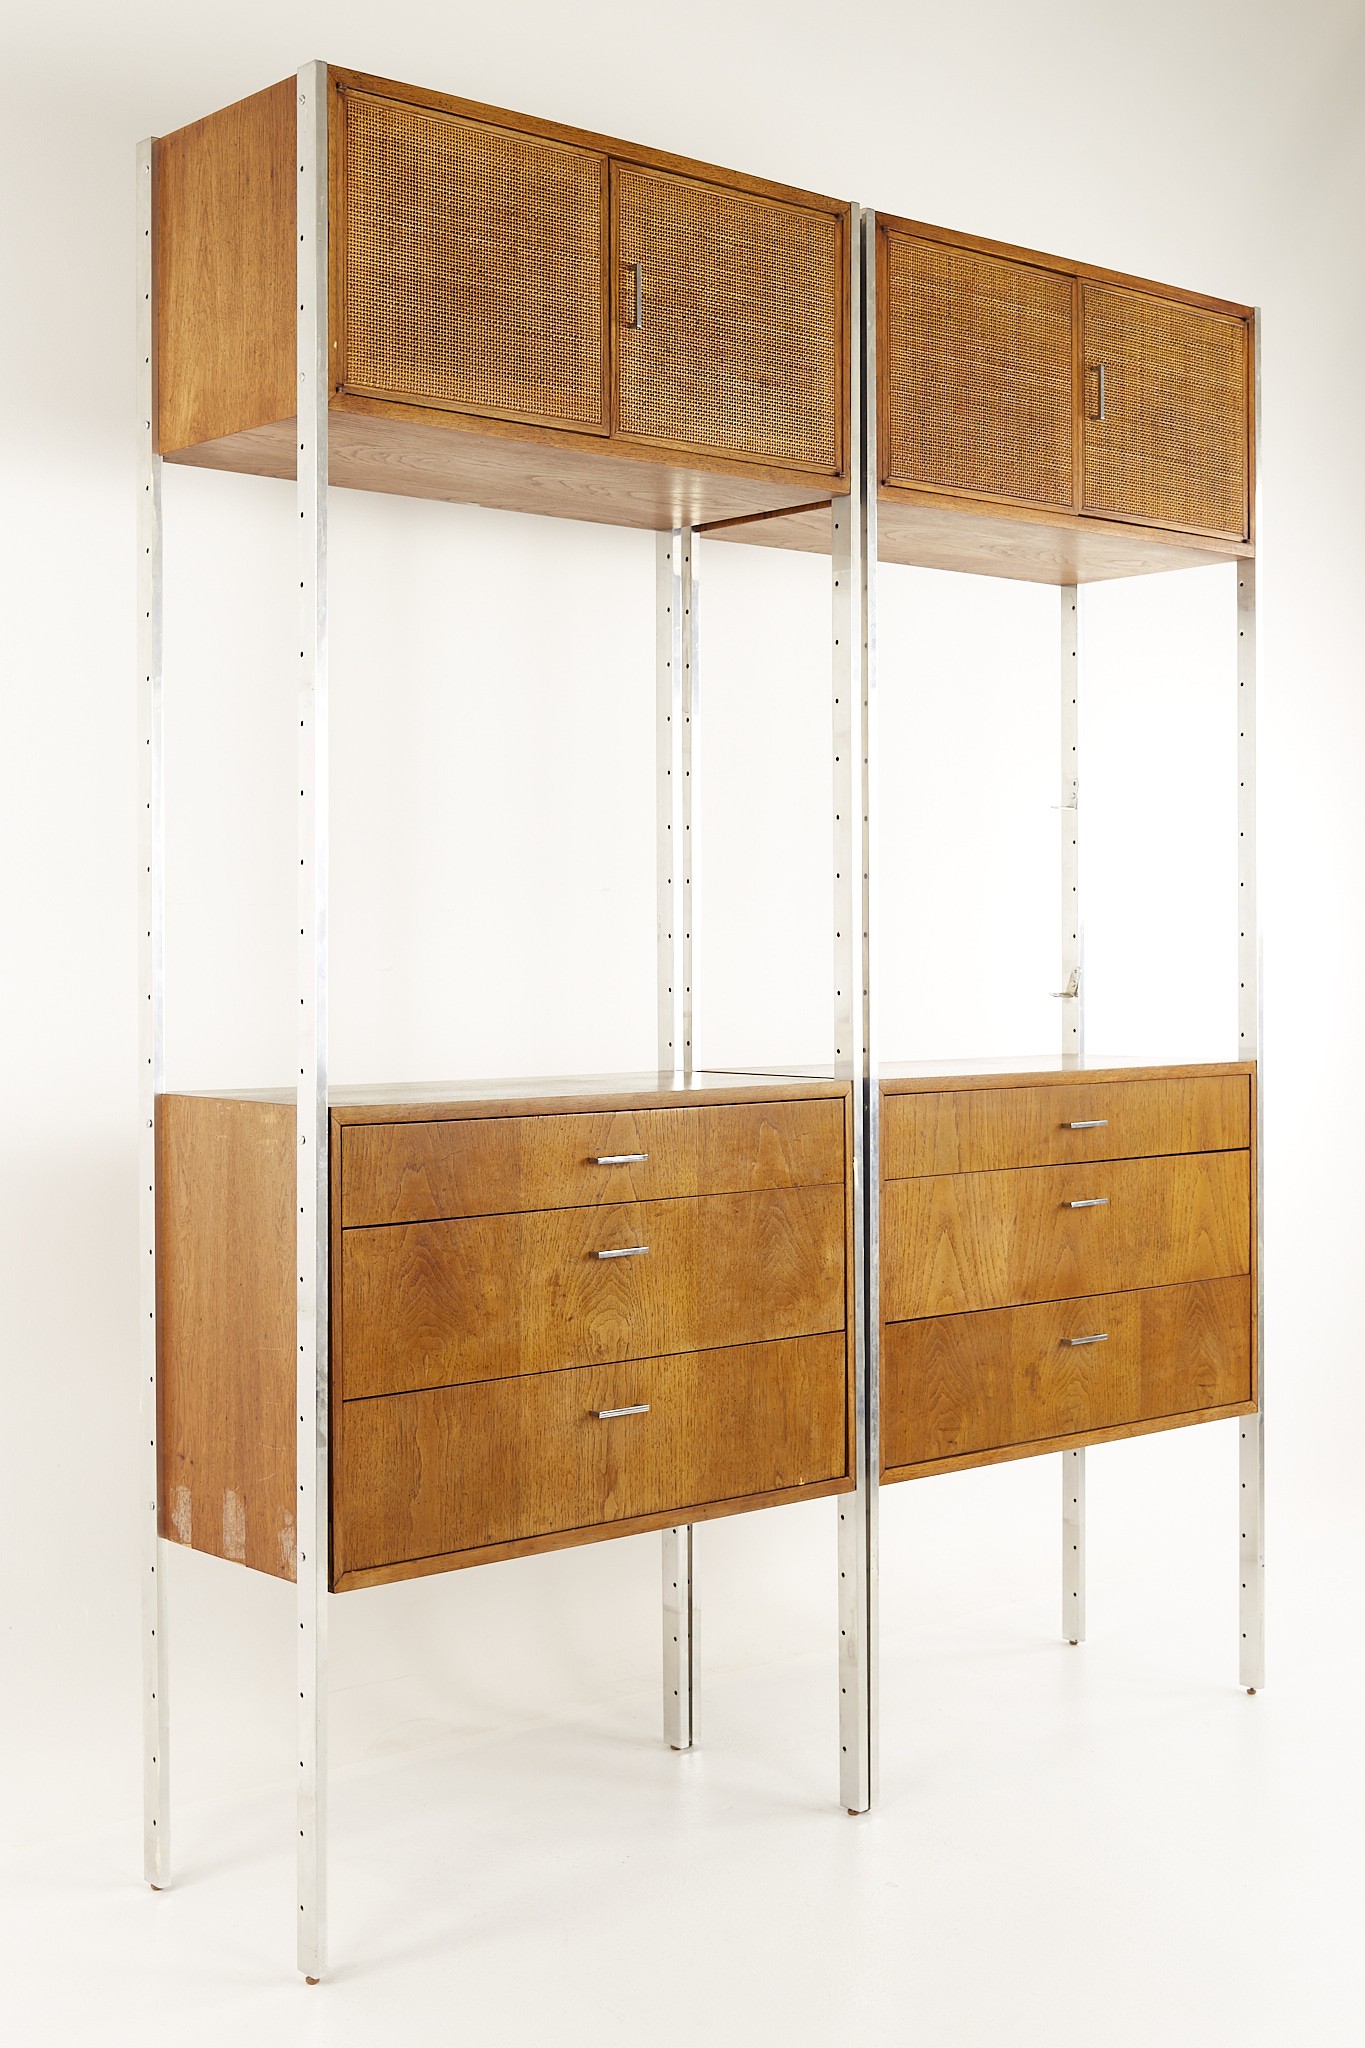 Founders Mid Century 4 Bay Walnut Chrome and Cane Wall Unit